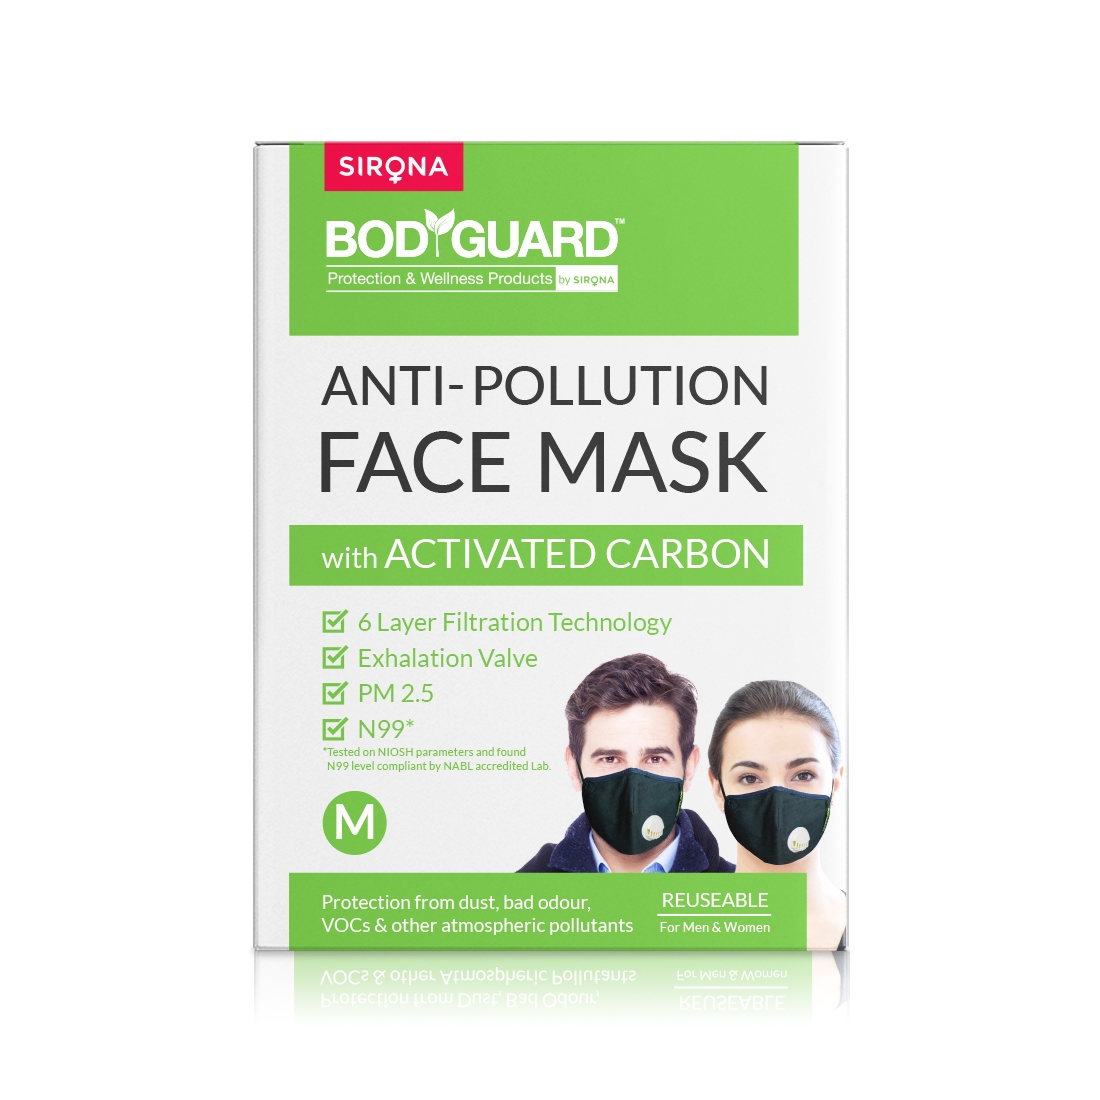 Bodyguard | Bodyguard Reusable Anti Pollution Face Mask with Activated Carbon, N99 + PM2.5 for Men and Women - Medium